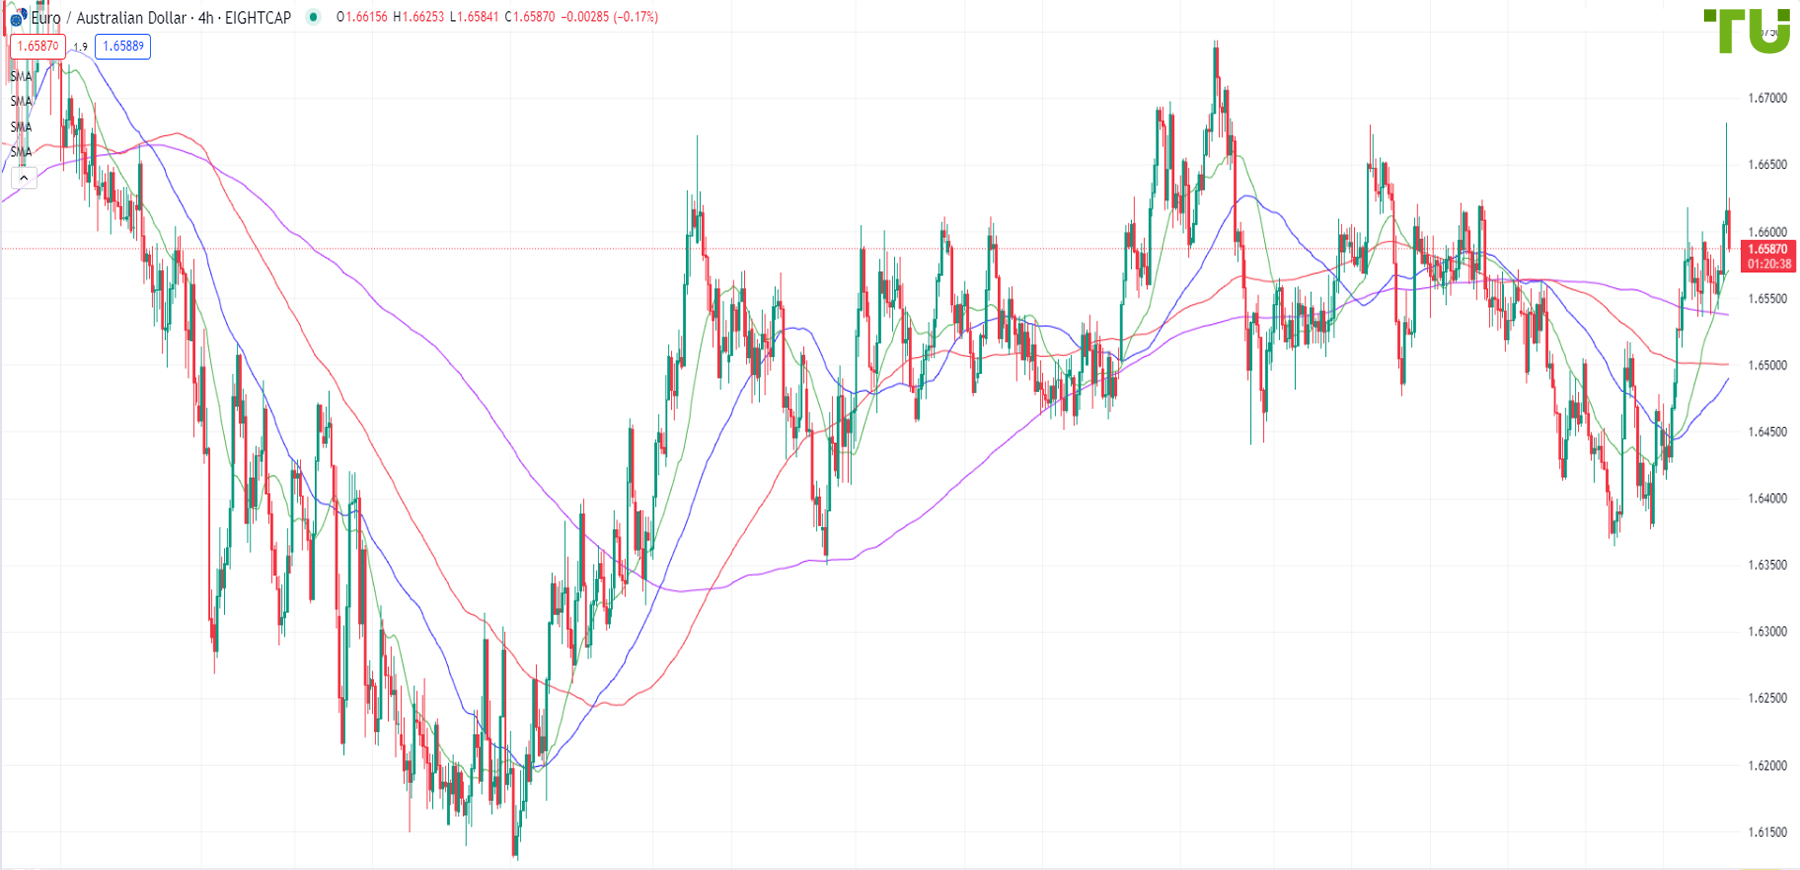 EUR/AUD returns to support at 1.6580 after rising to 1.6680